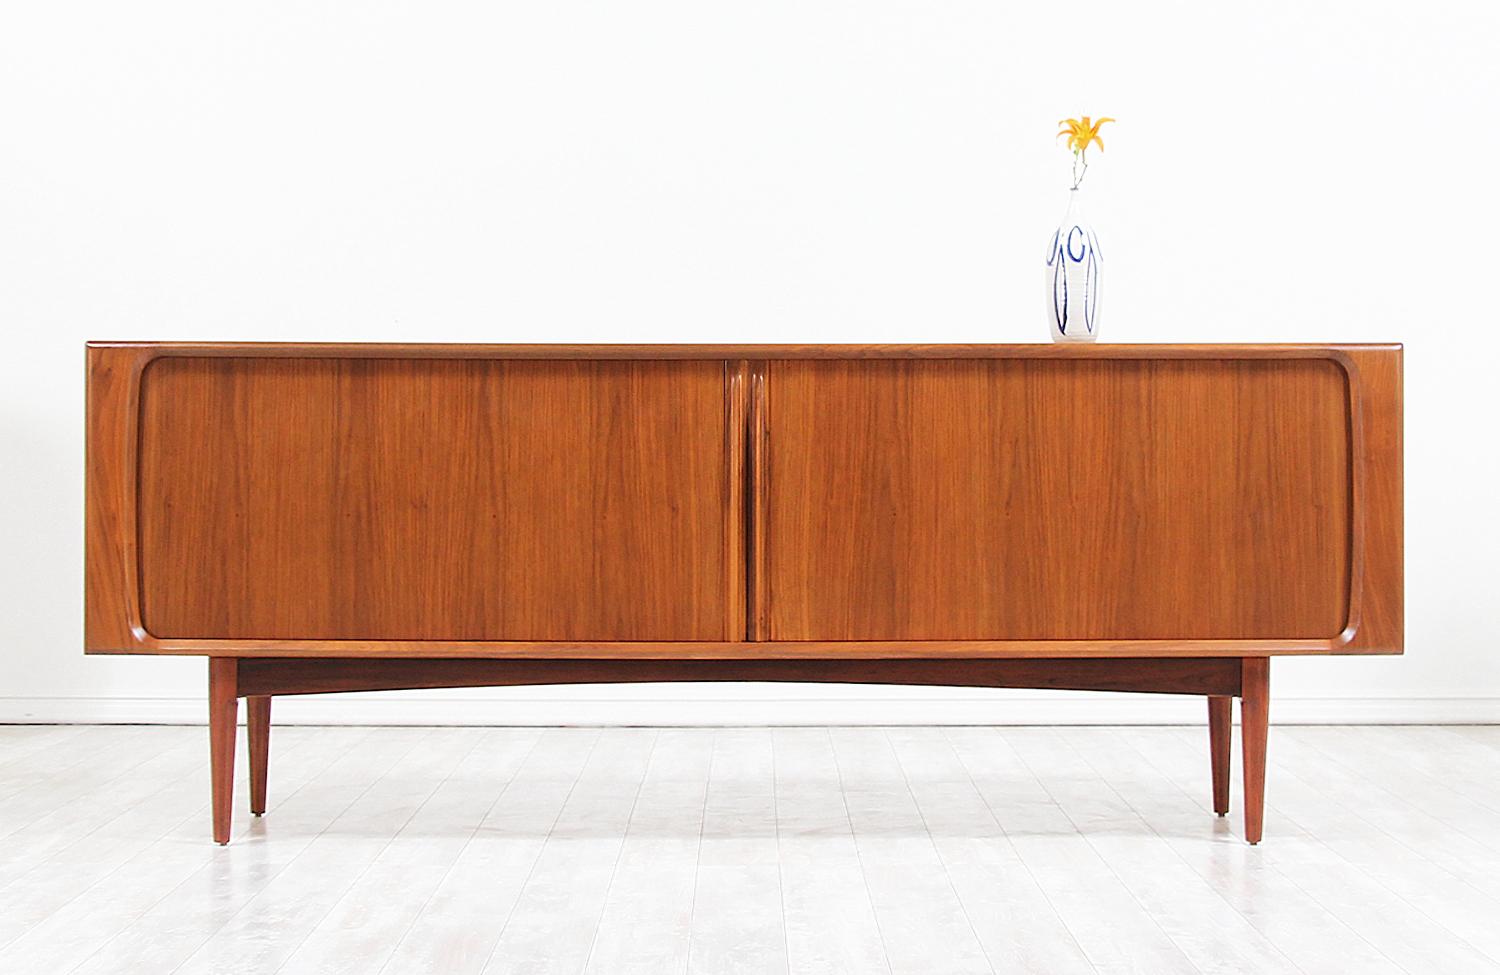 Mid-Century Modern credenza model No. 142 designed and manufactured by Bernhard Pedersen & Søn in Denmark in 1965. This Classic Danish modern and functional design features a solid walnut wood frame with tapered legs and gorgeous tambour doors with